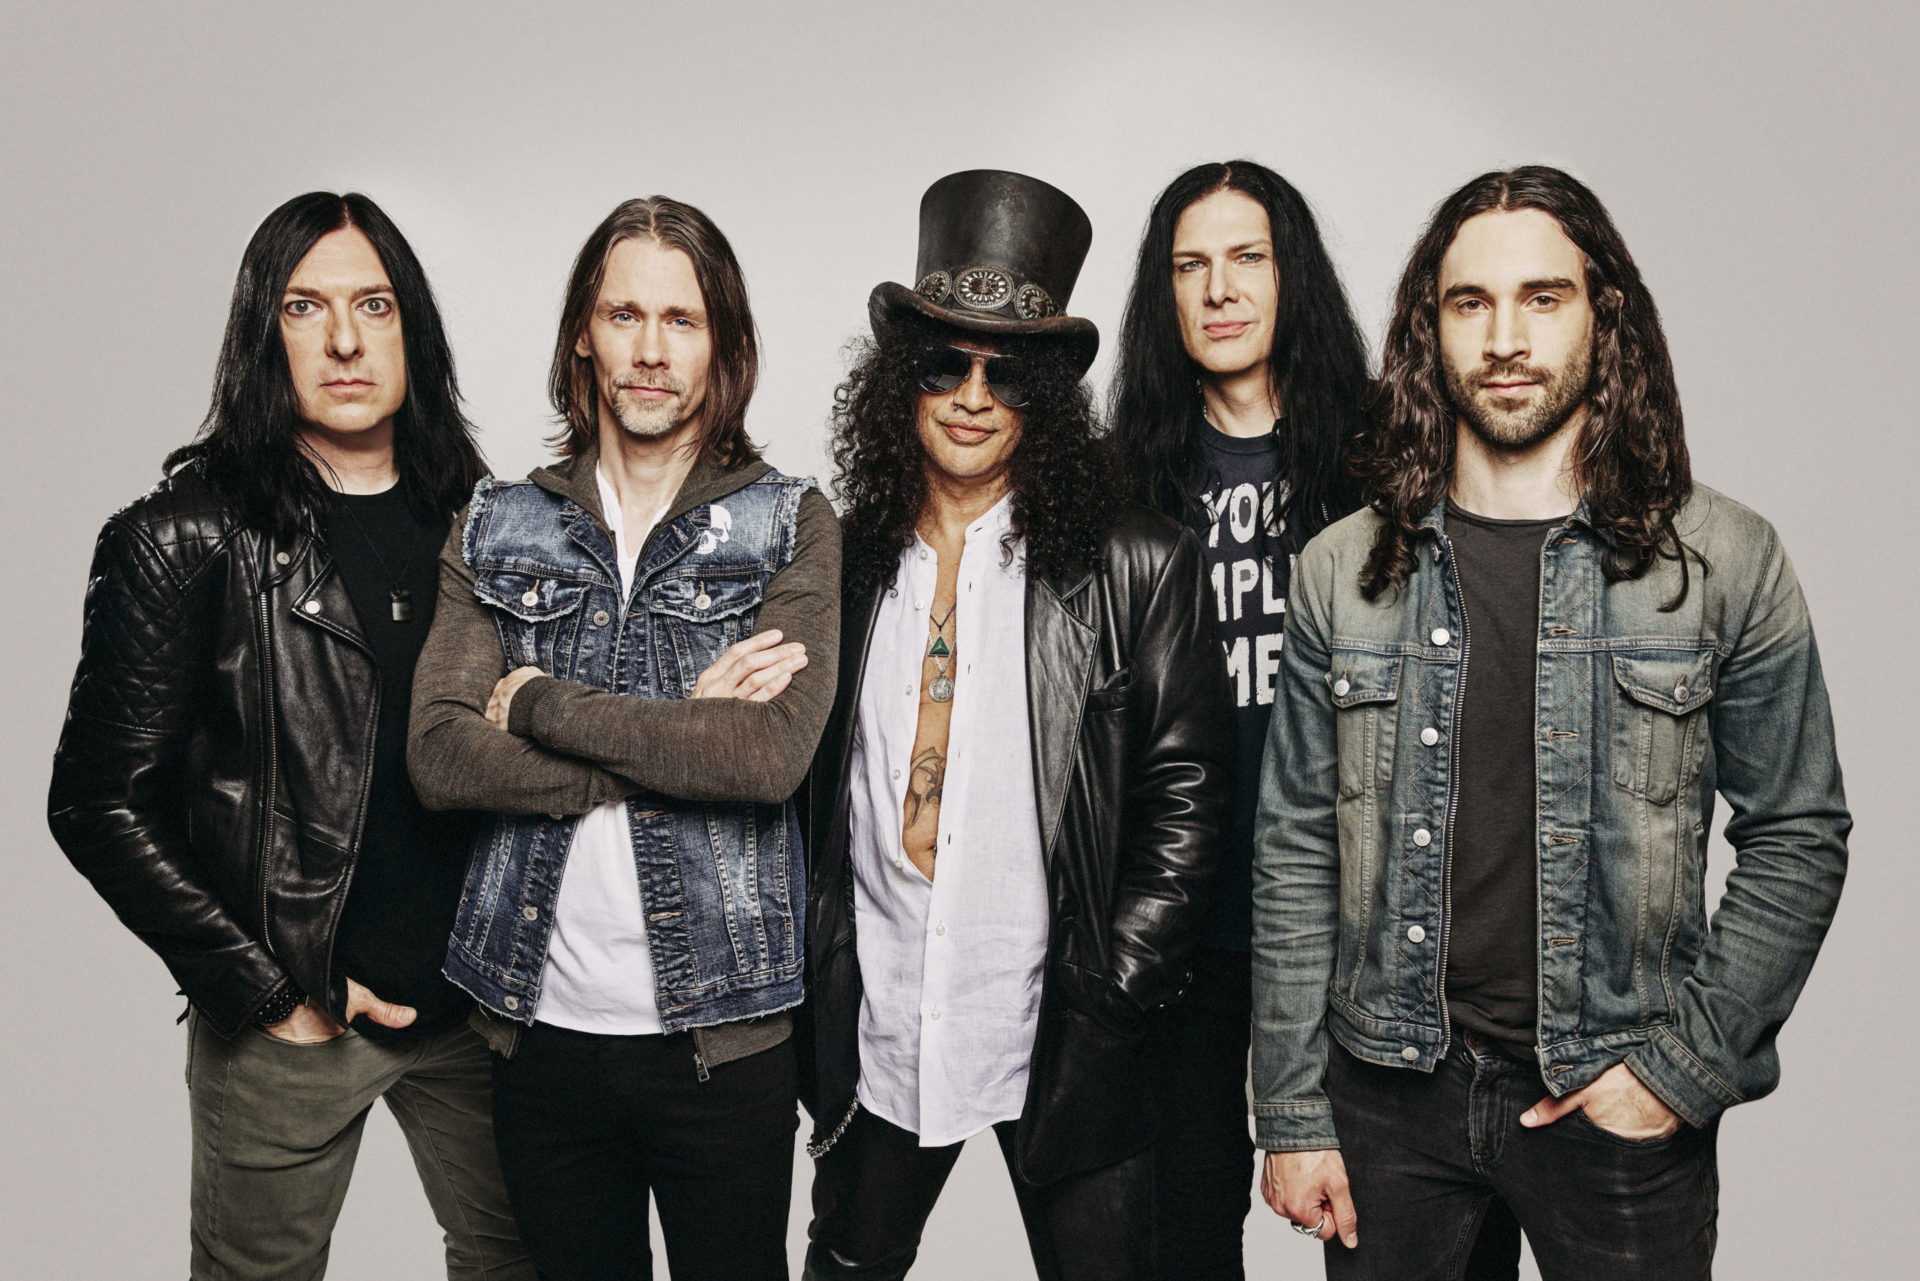 Slash posing for a photograph with all of his bandmates